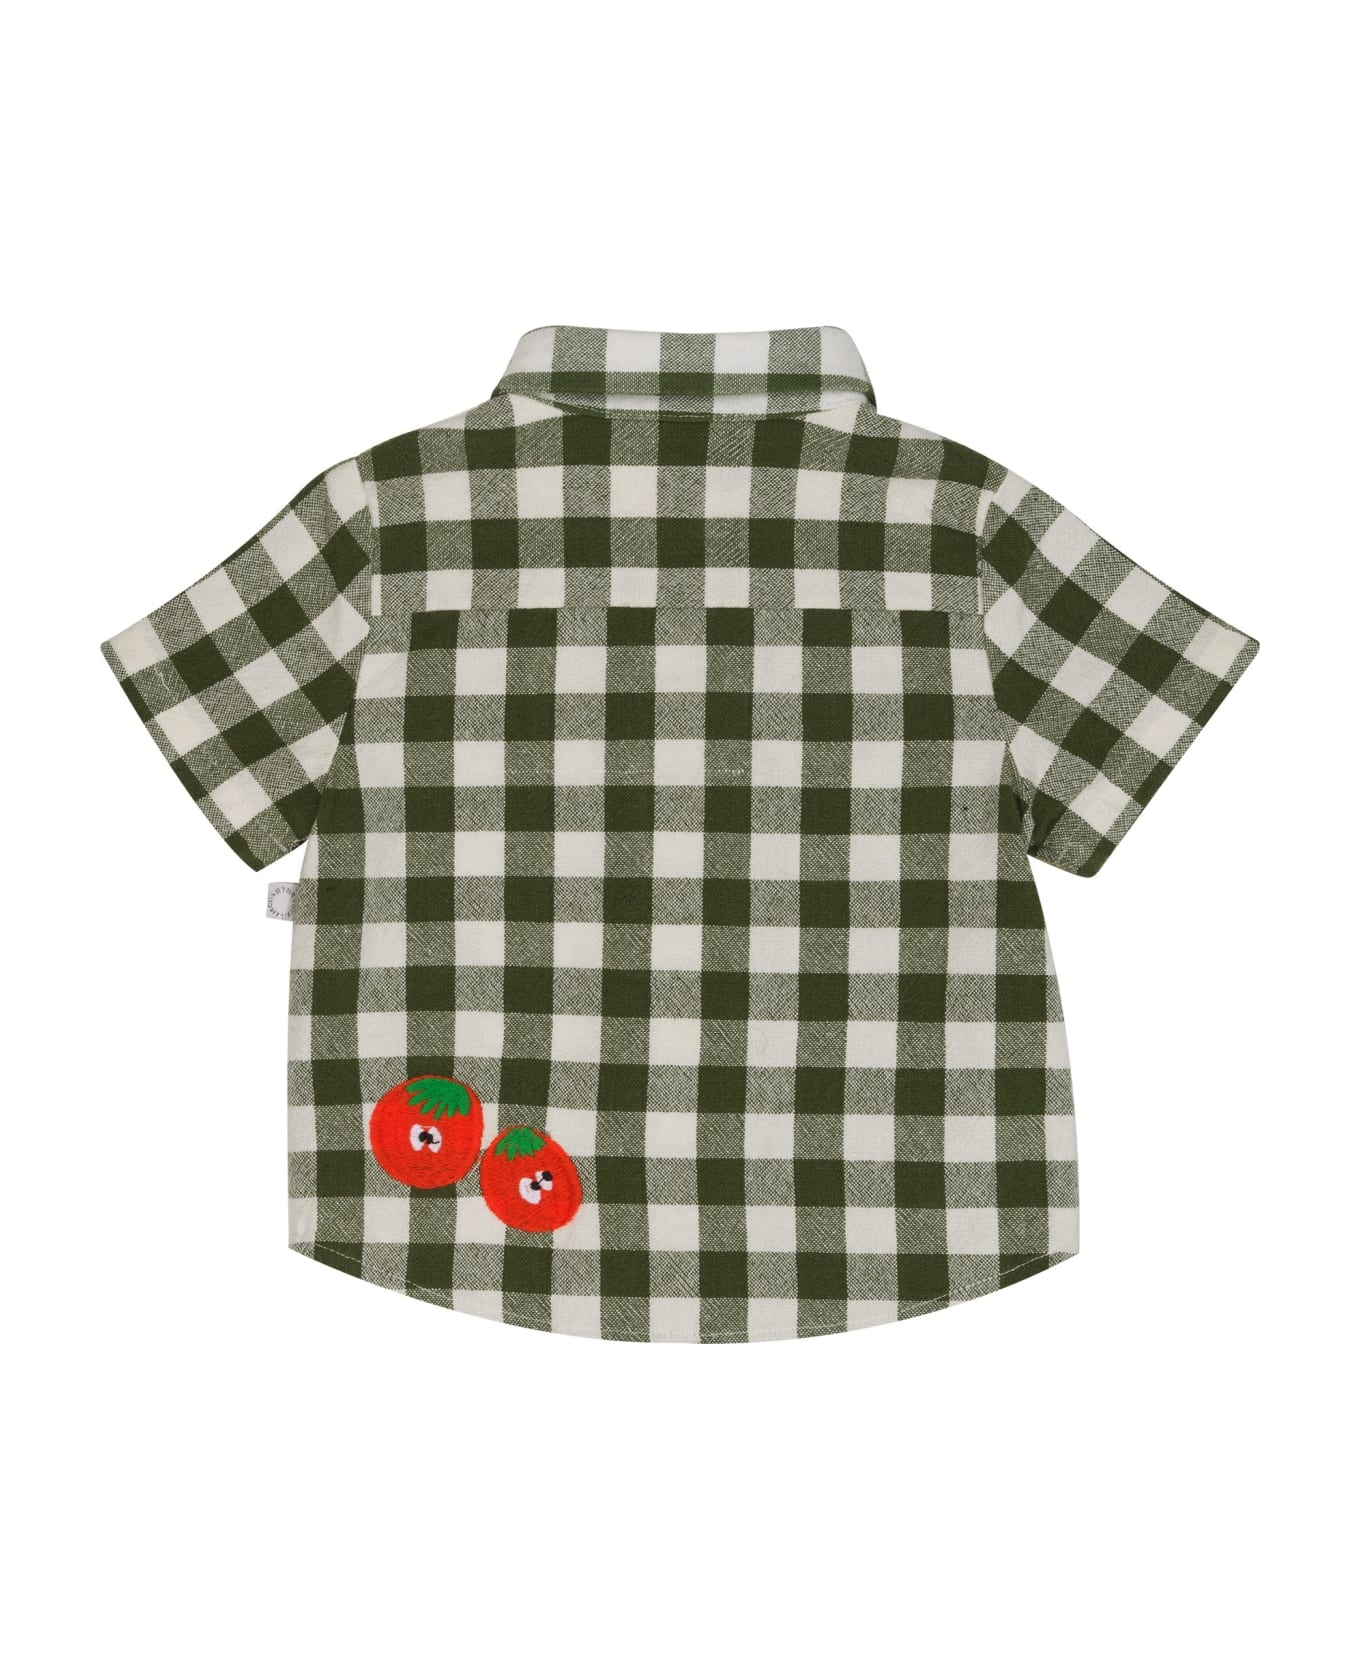 Stella McCartney Kids Shirt With Embroidery - Green シャツ